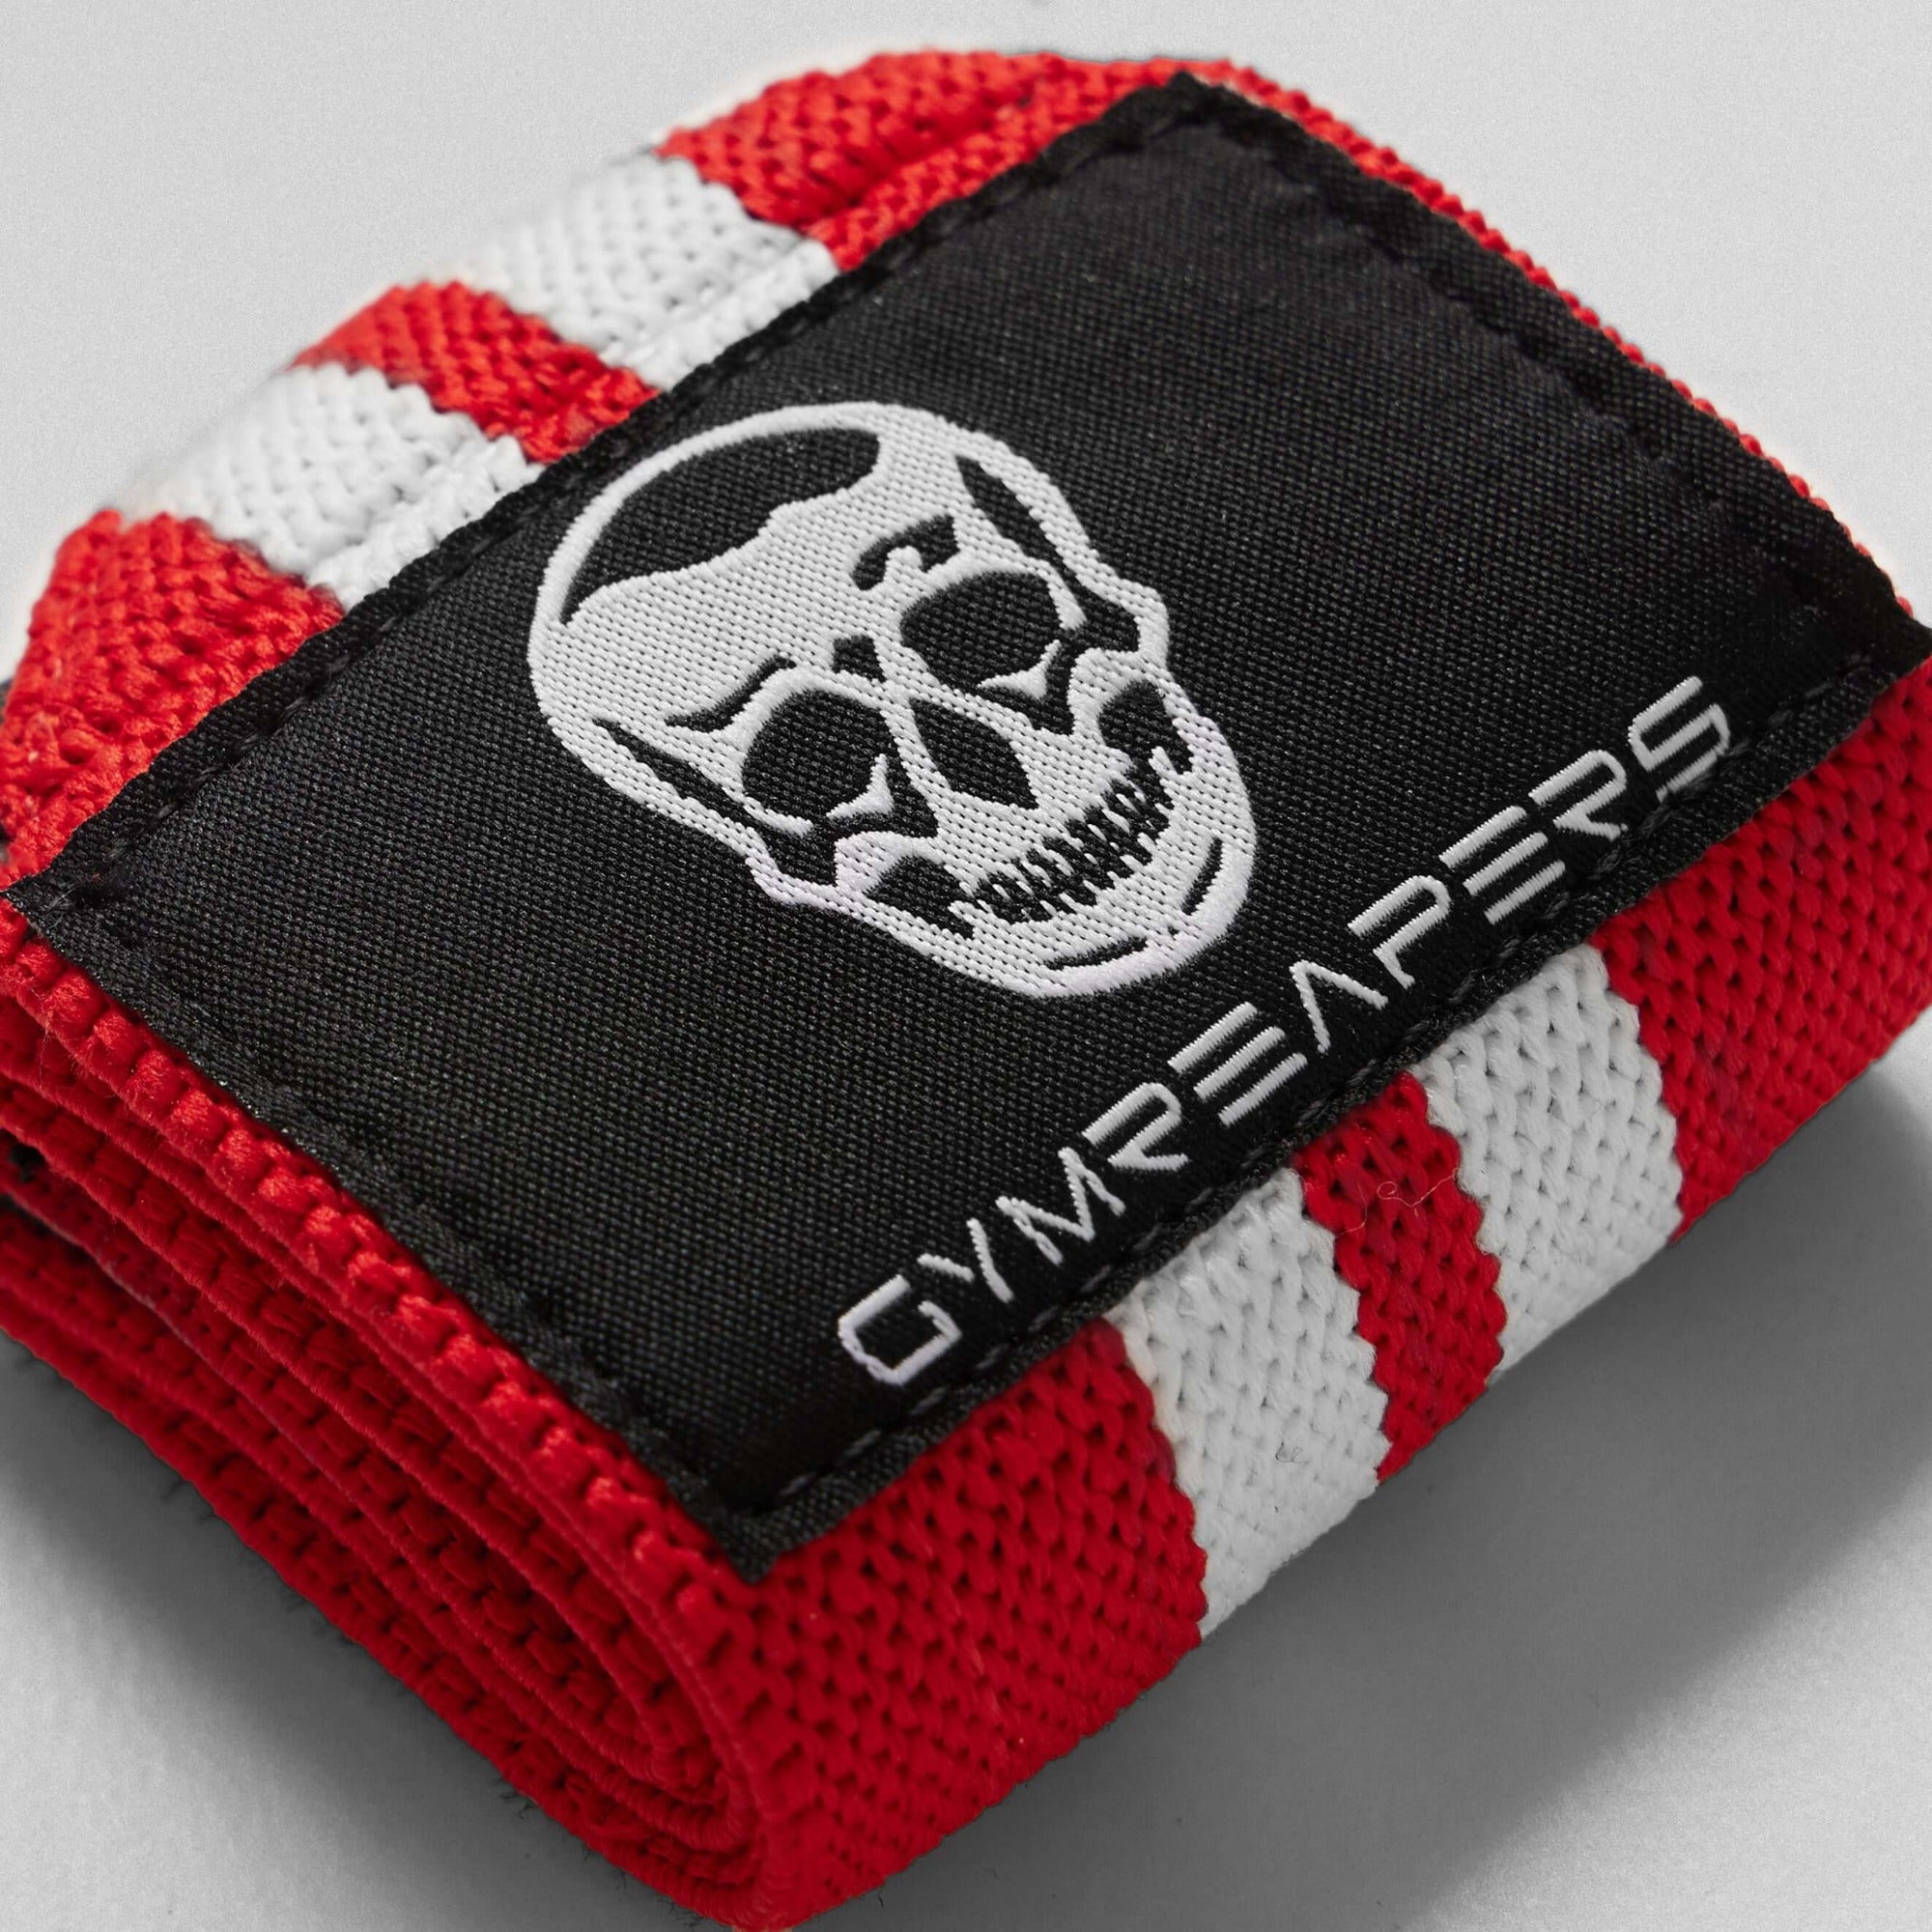 Gymreapers Wrist Wraps - 18 Weightlifting Wrist Support - Red/White